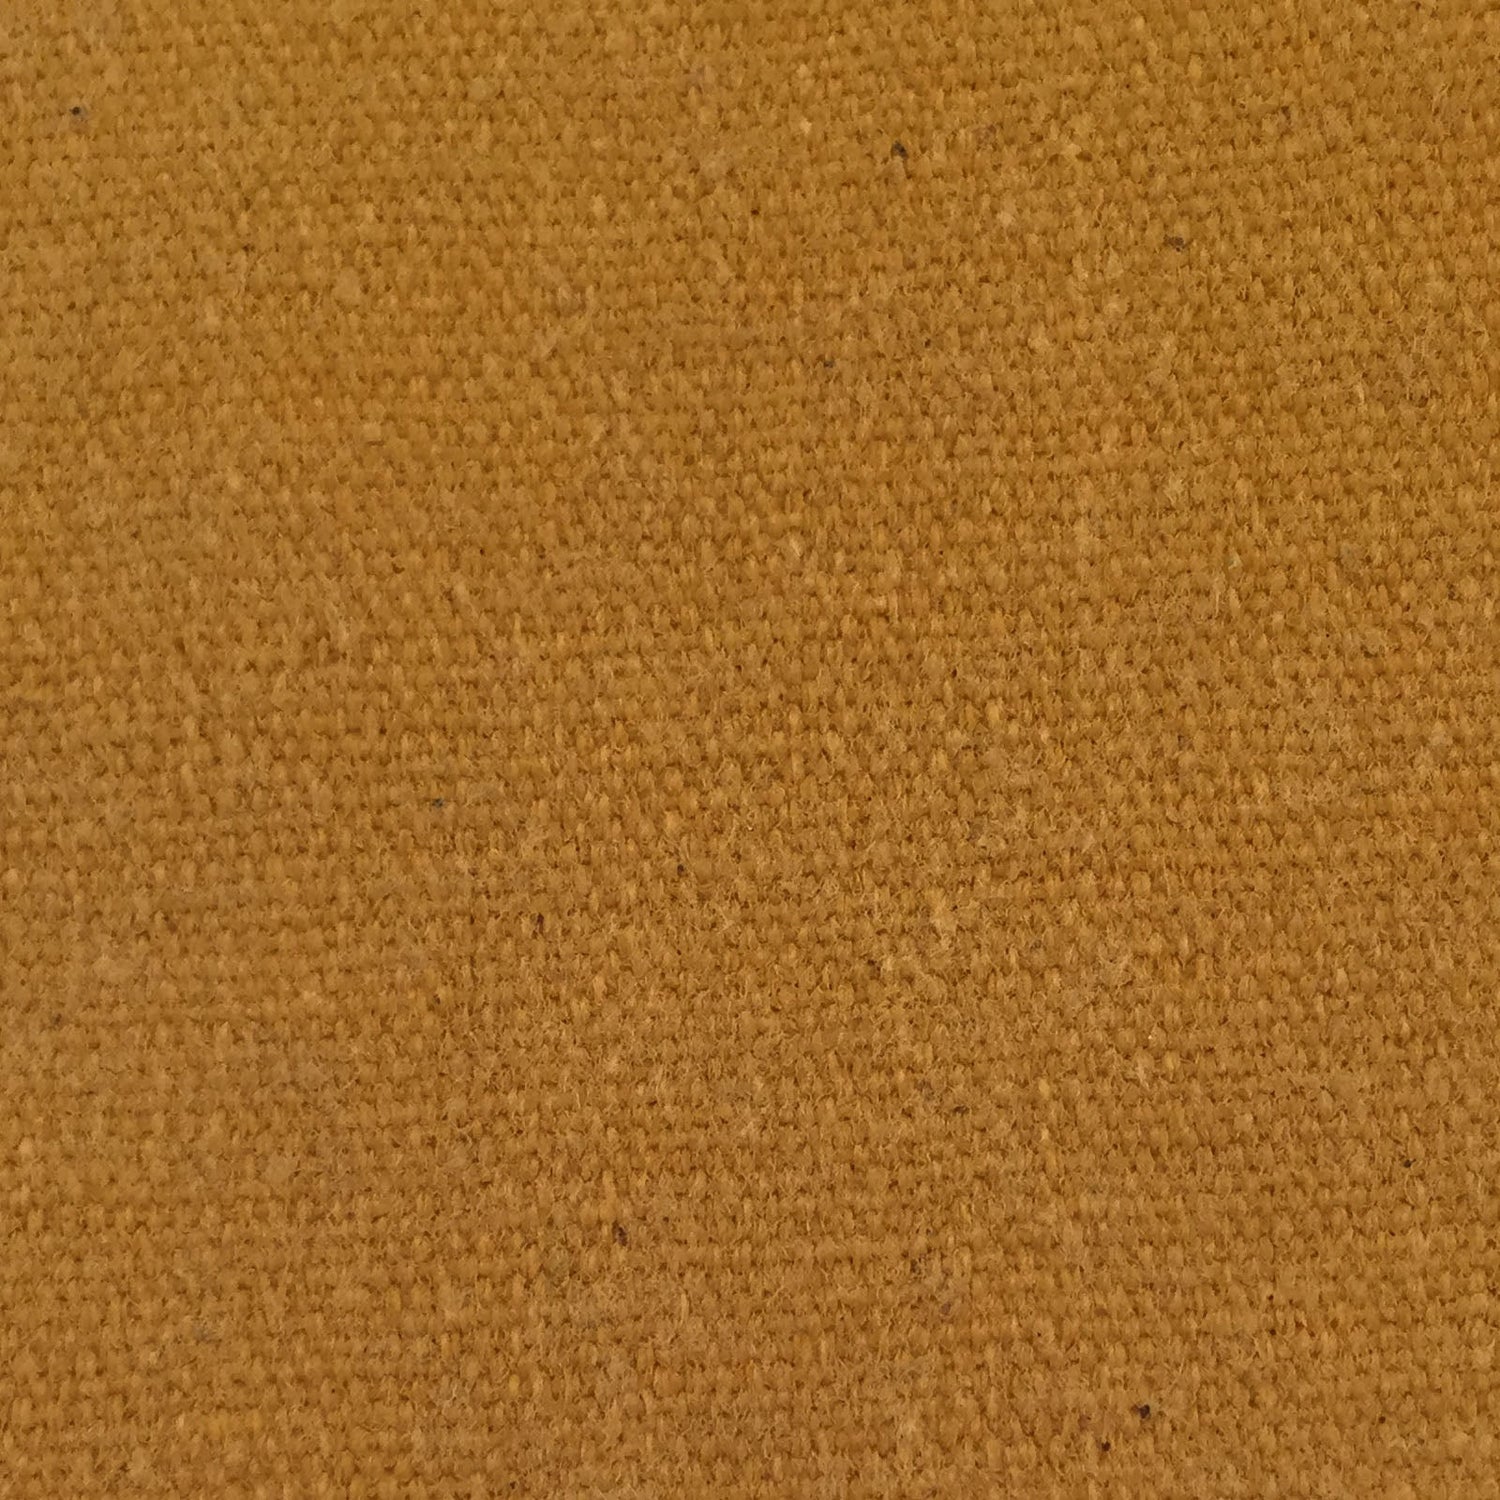 16 oz Canvas Treated Water Resistant Fabric [60" x 50 Yards]